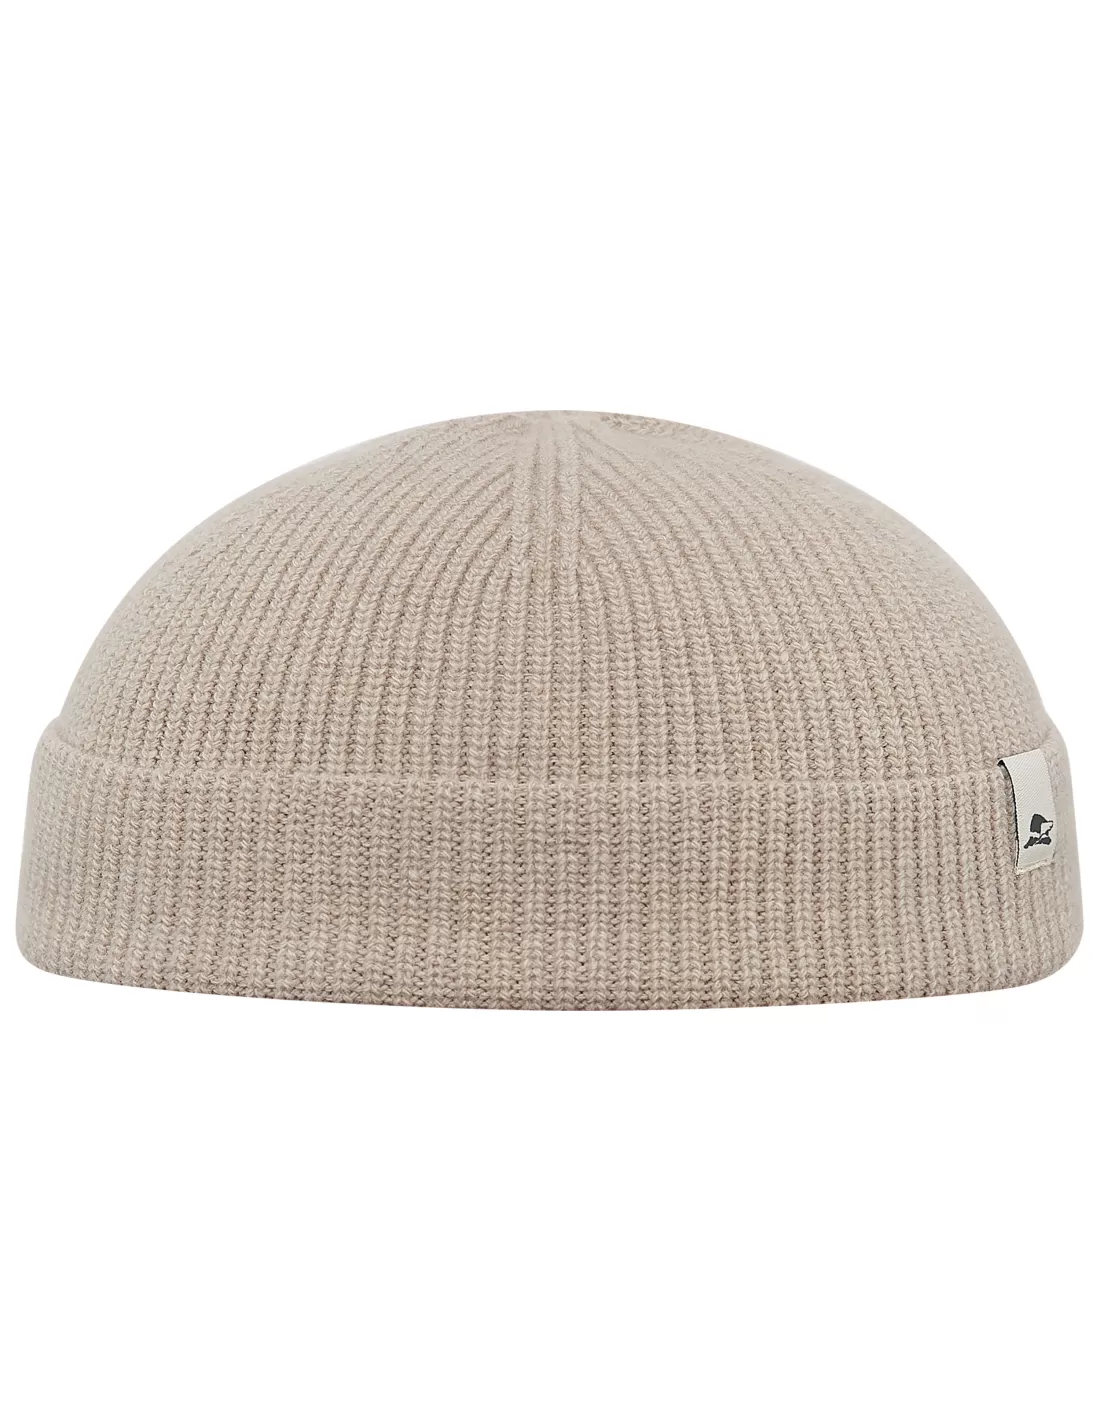 Duke cut above ears beanie made of cashmere and ultrafine merino wool. Size  Universal Color Beige